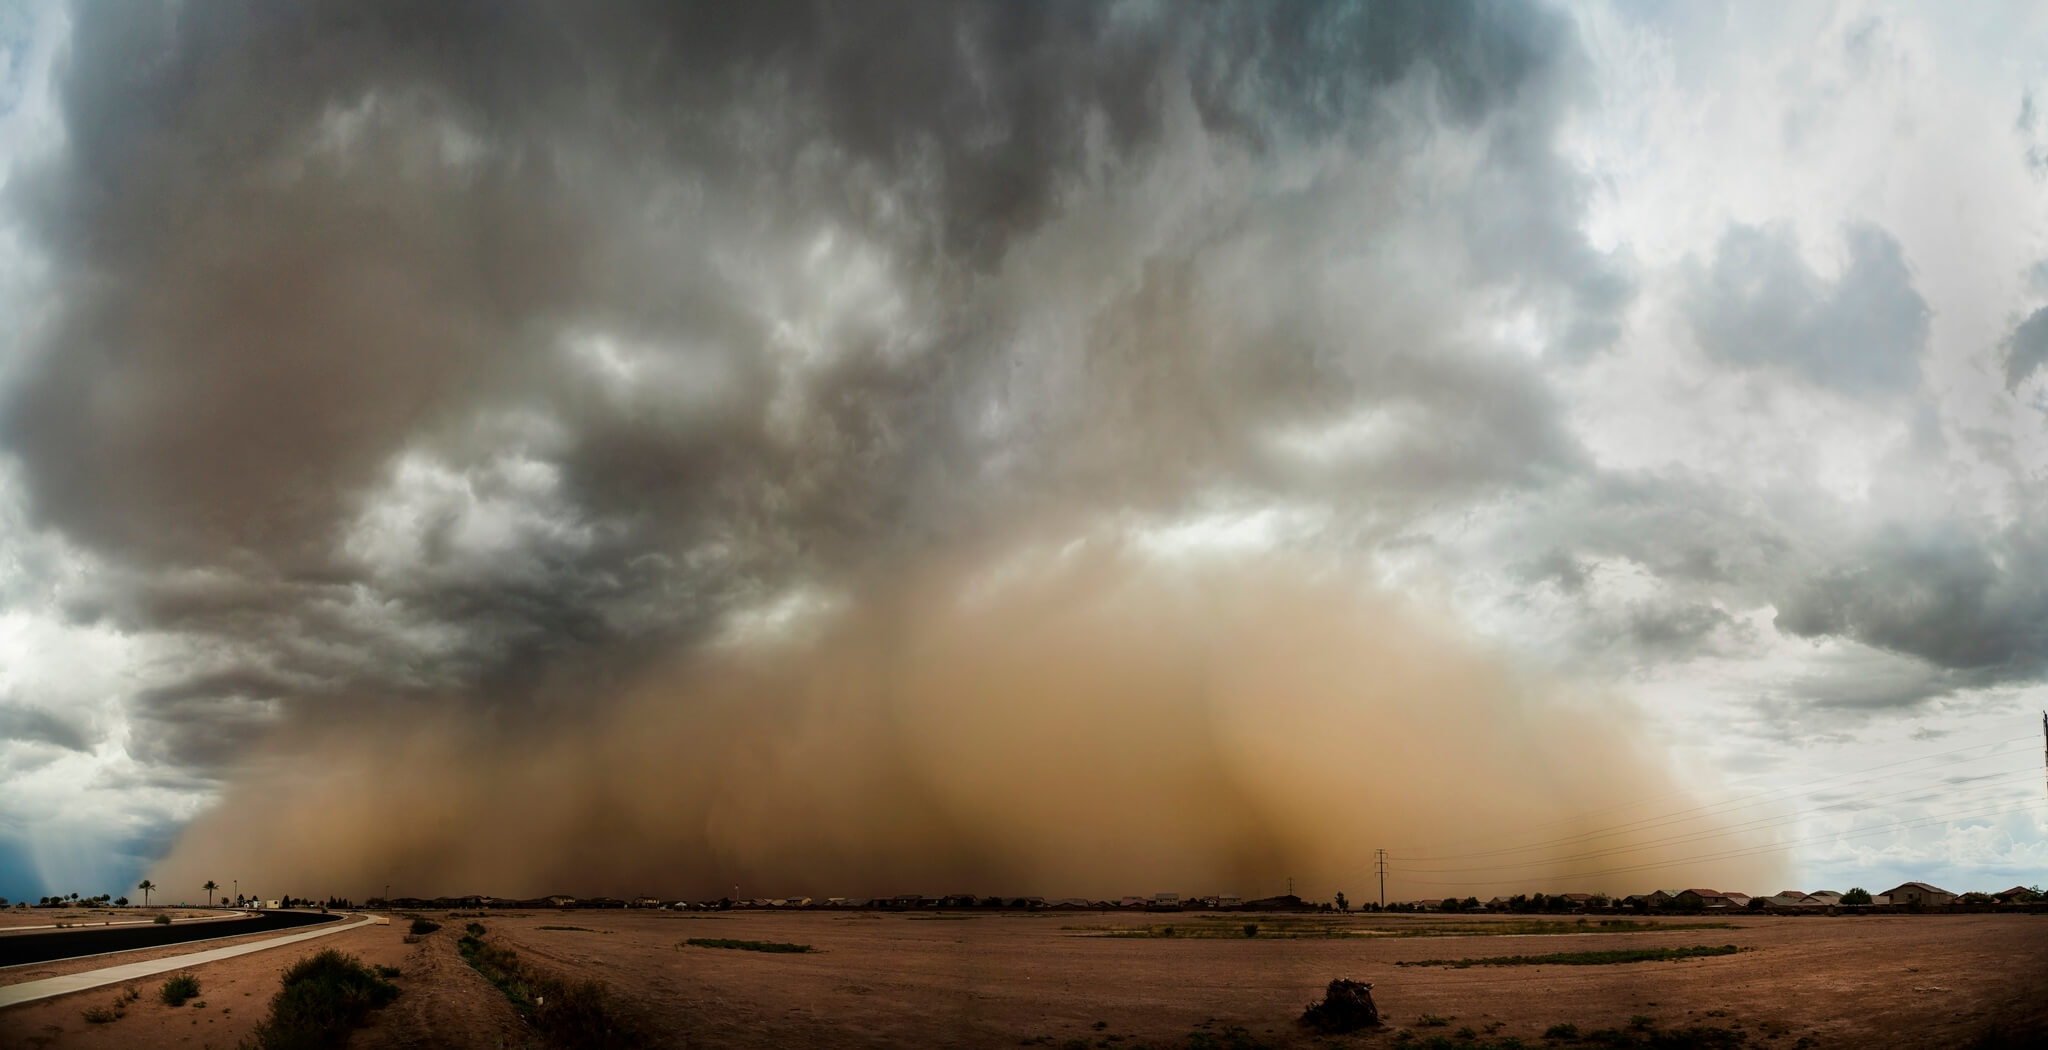 A haboob blowing over the Arizona desert highway.
Flickr User Brock Whittaker Photography